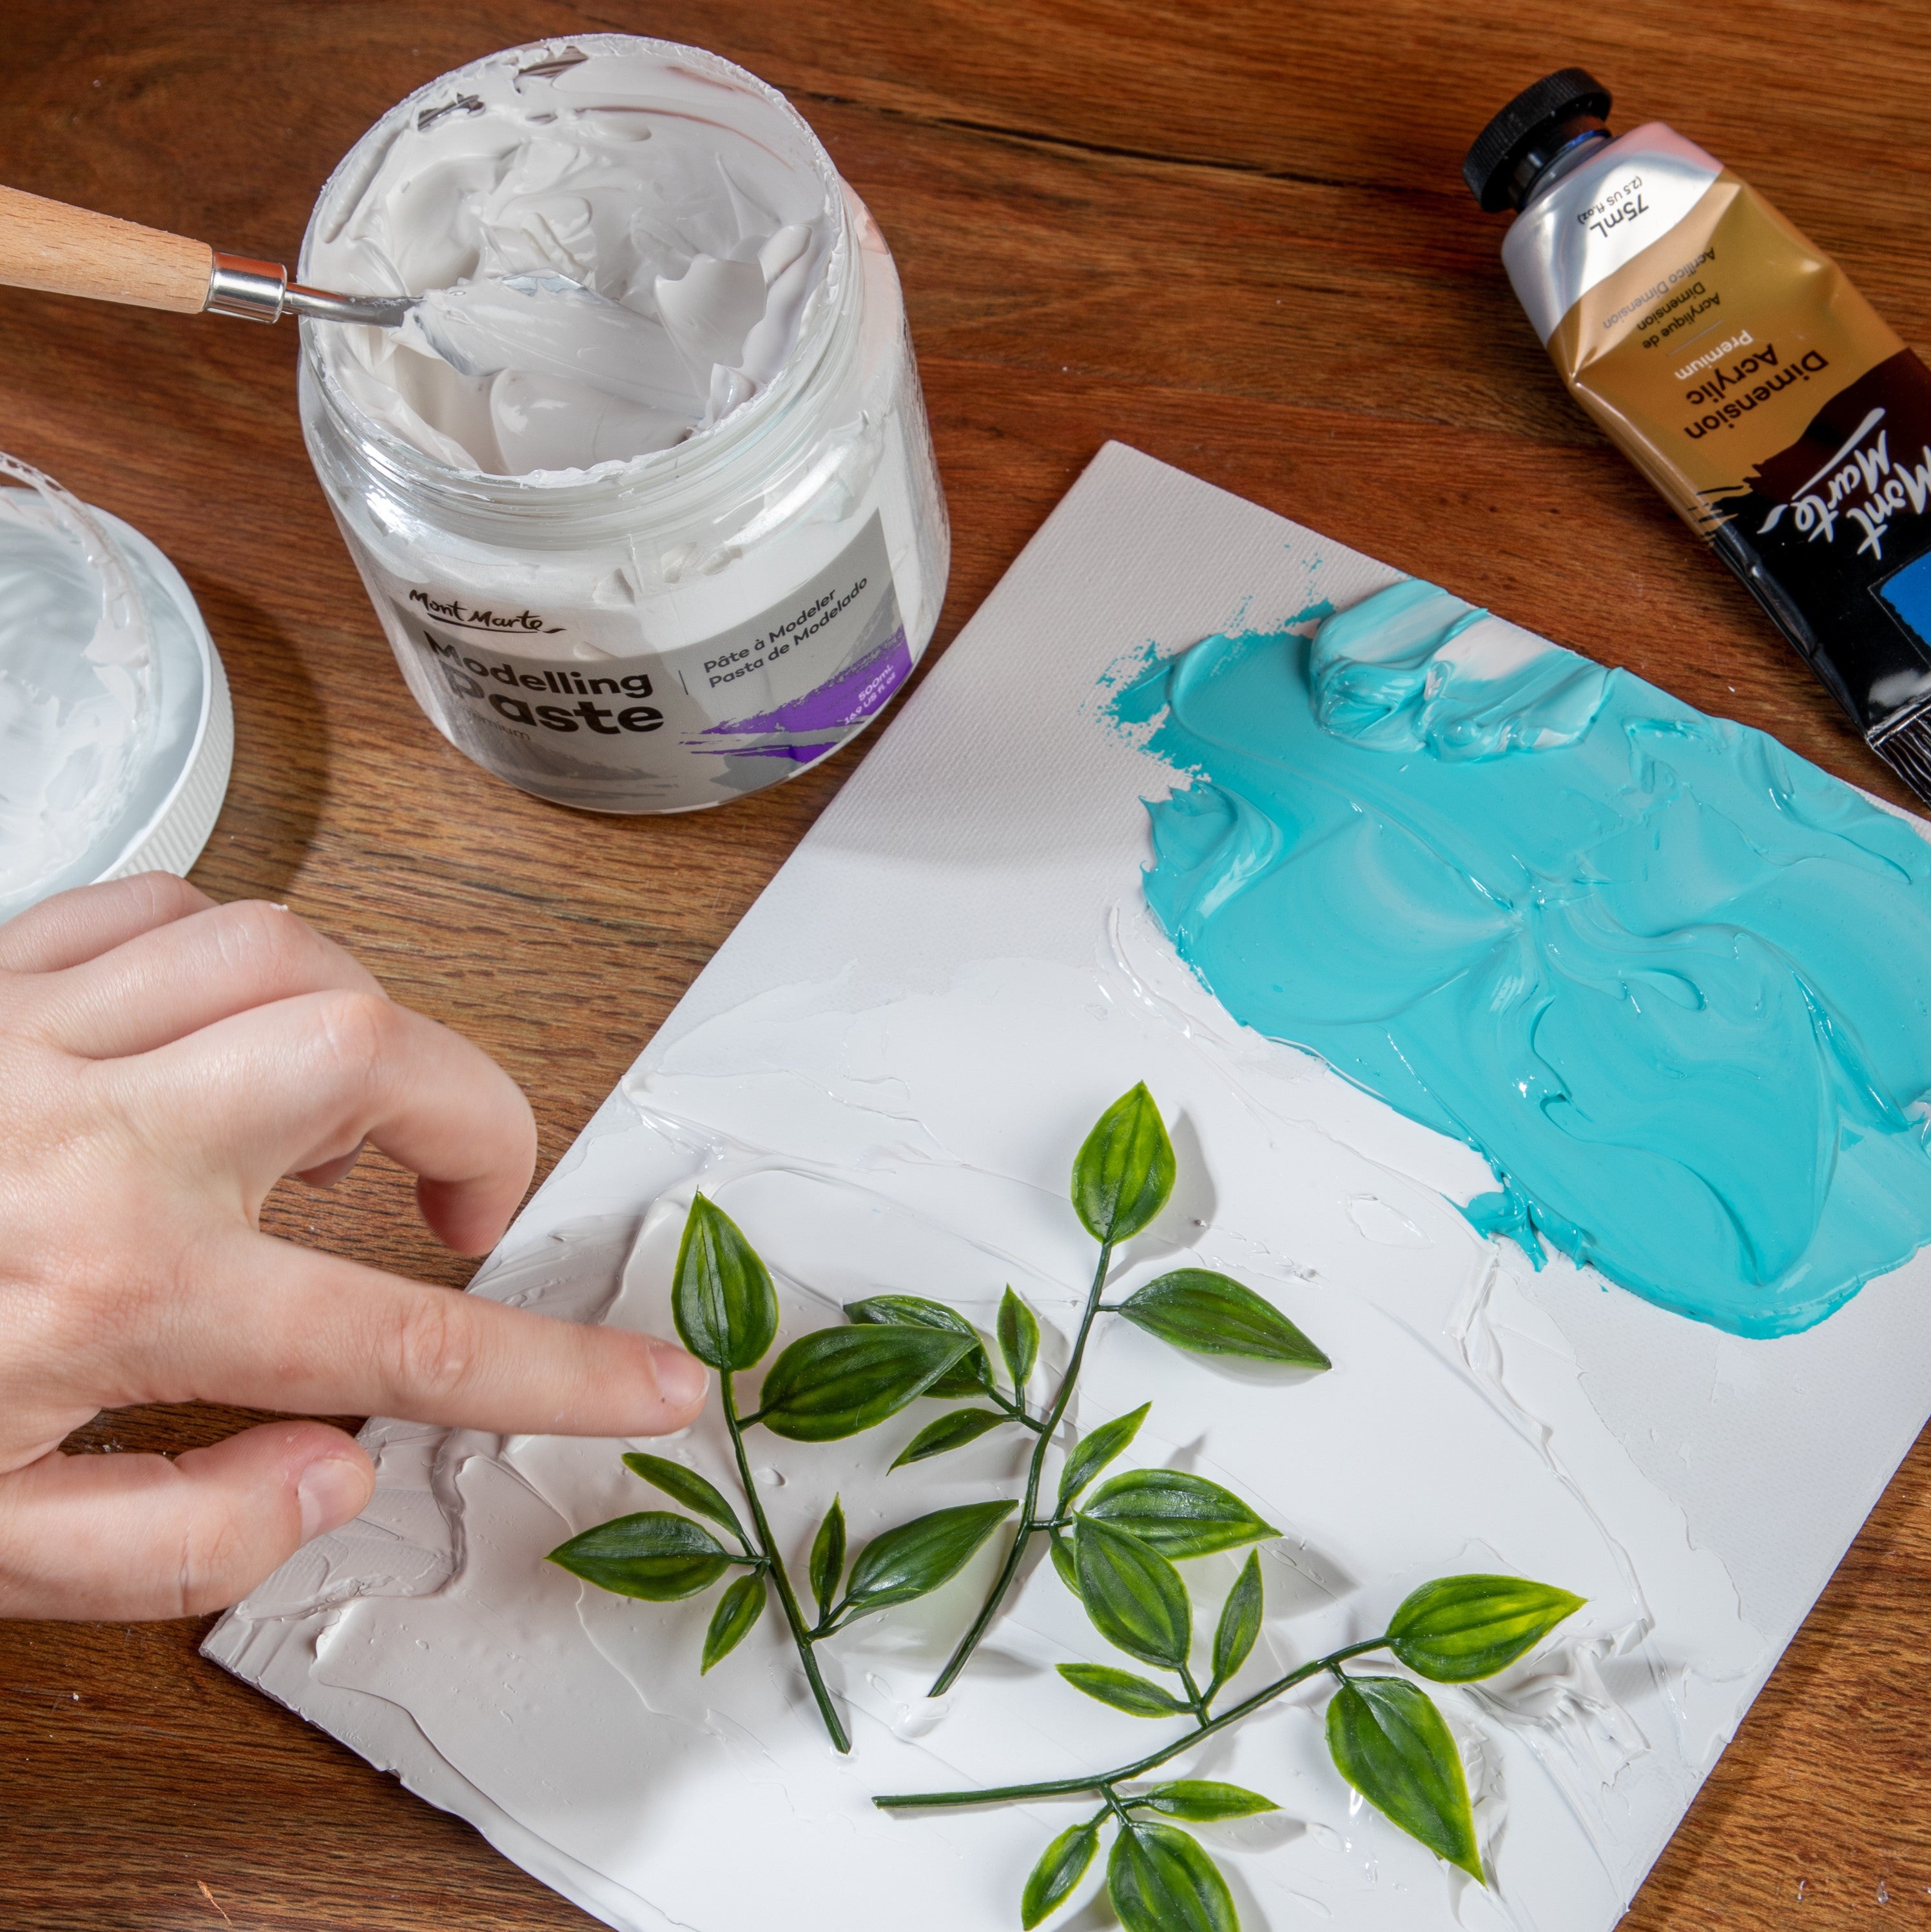 7. Modelling paste mixed with paint and being used to stick leaves to a canvas